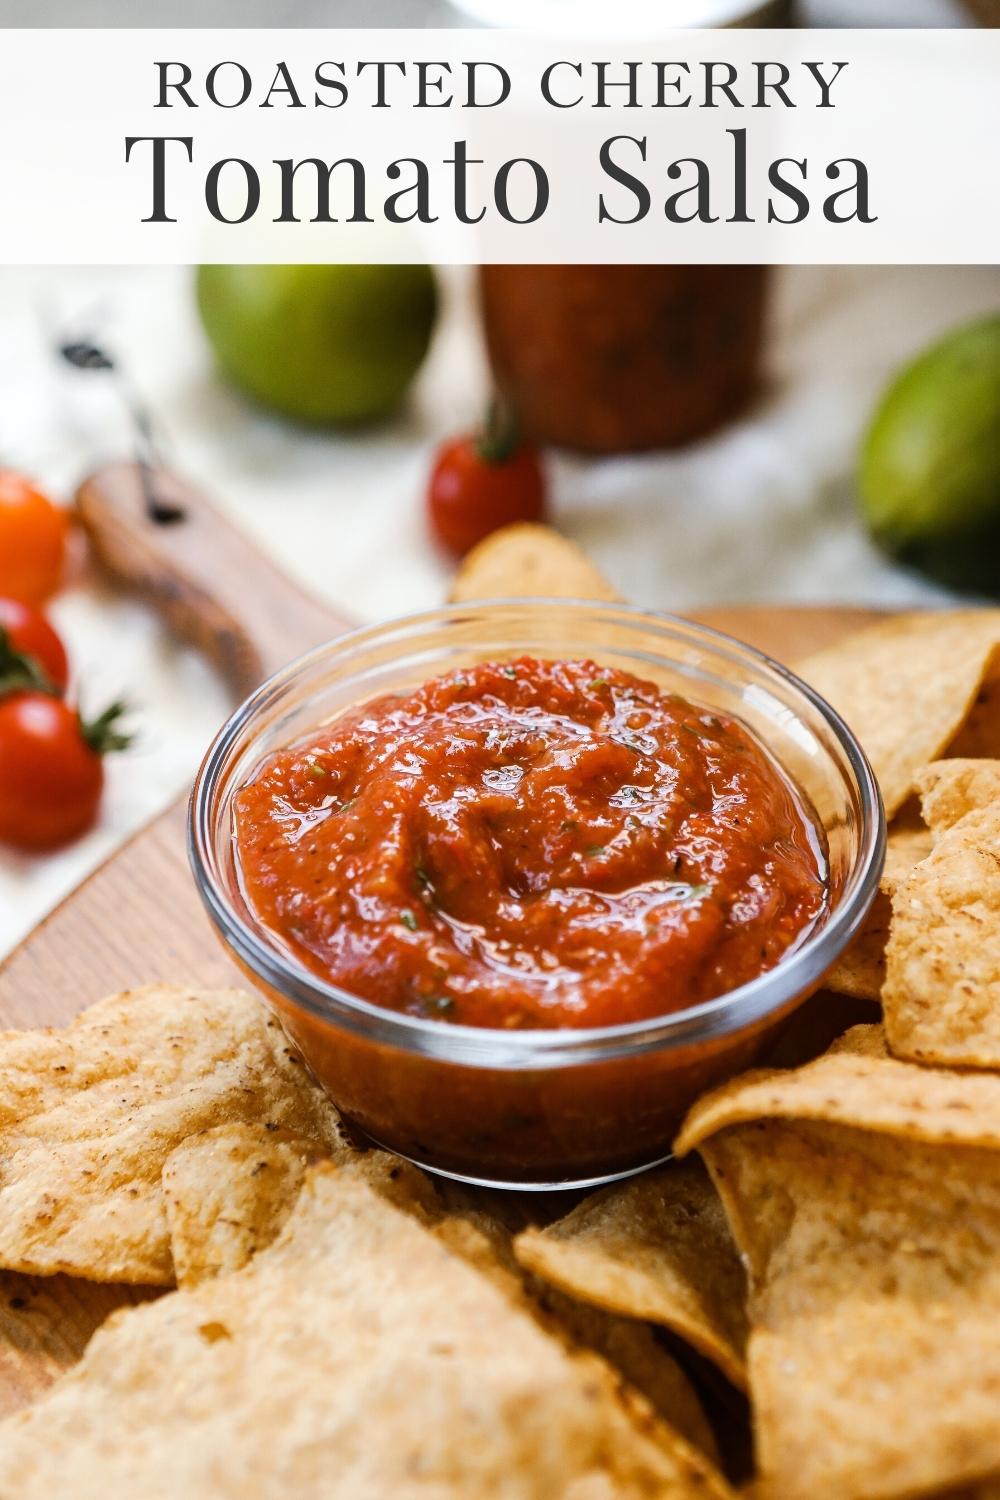 Roasted Cherry Tomato Salsa with fresh tomatoes